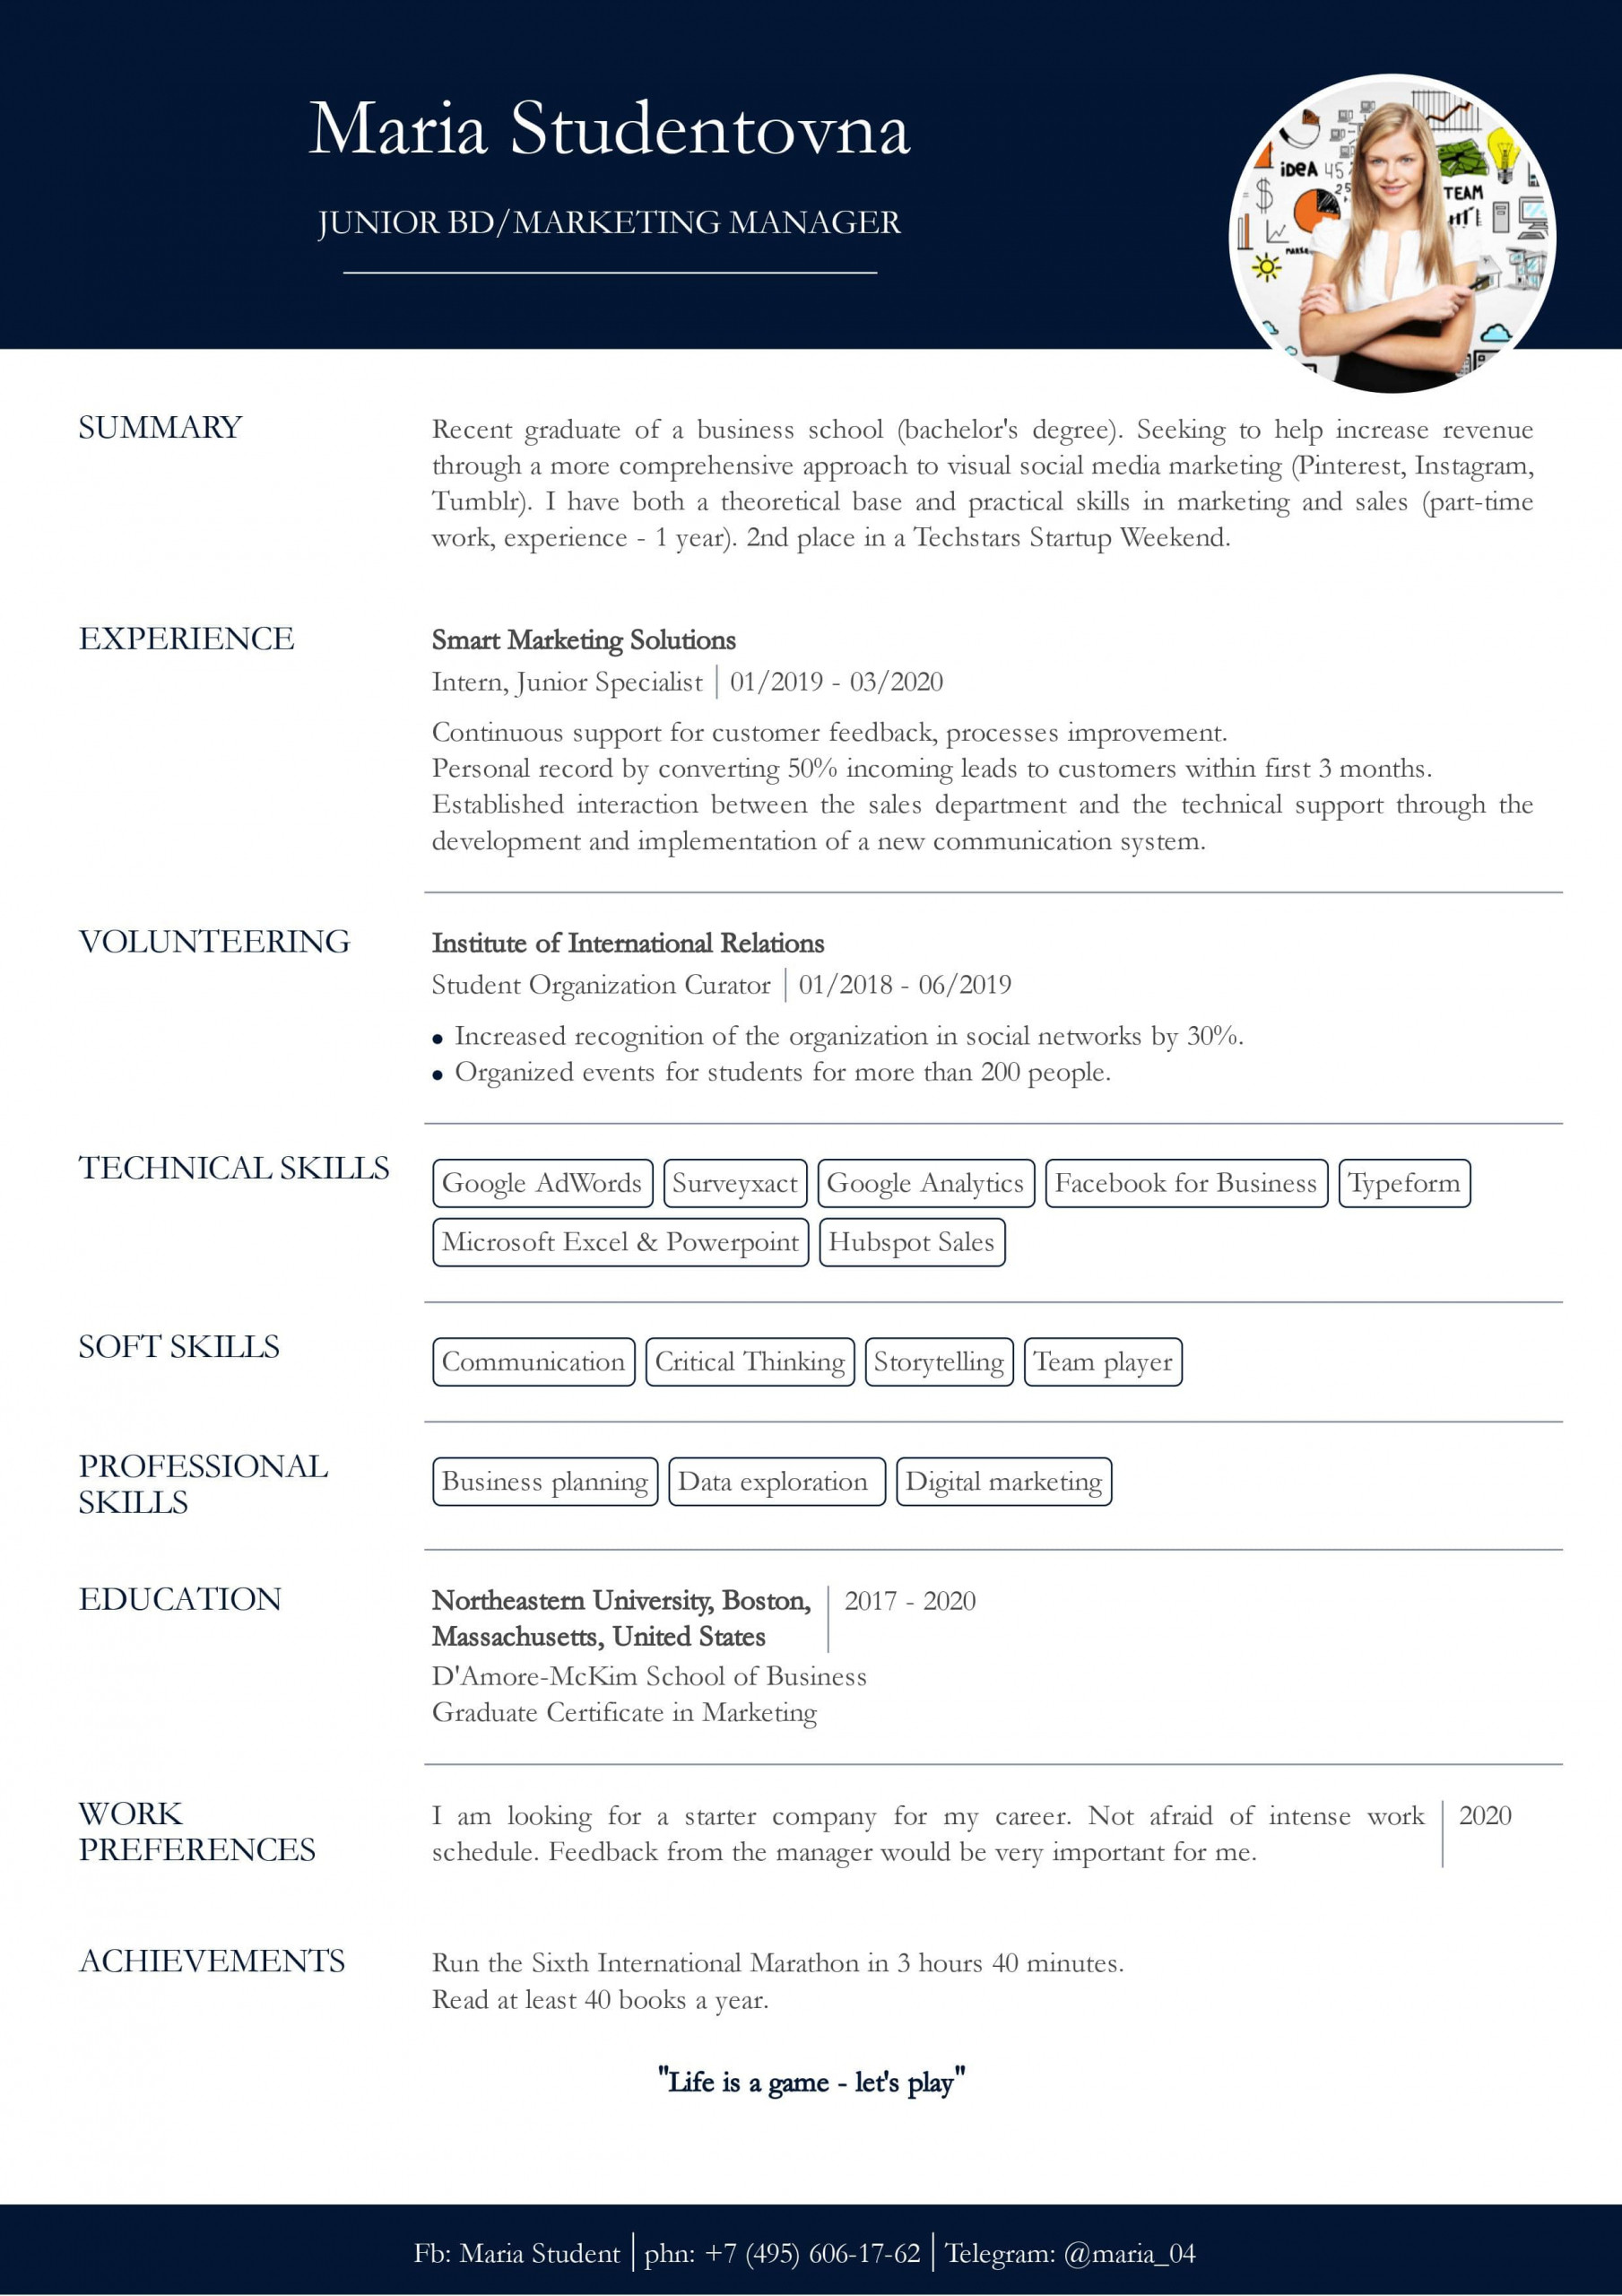 Sample Resume for Newly Graduated Student with No Experience Resume with No Work Experience. Sample for Students. – Cv2you Blog